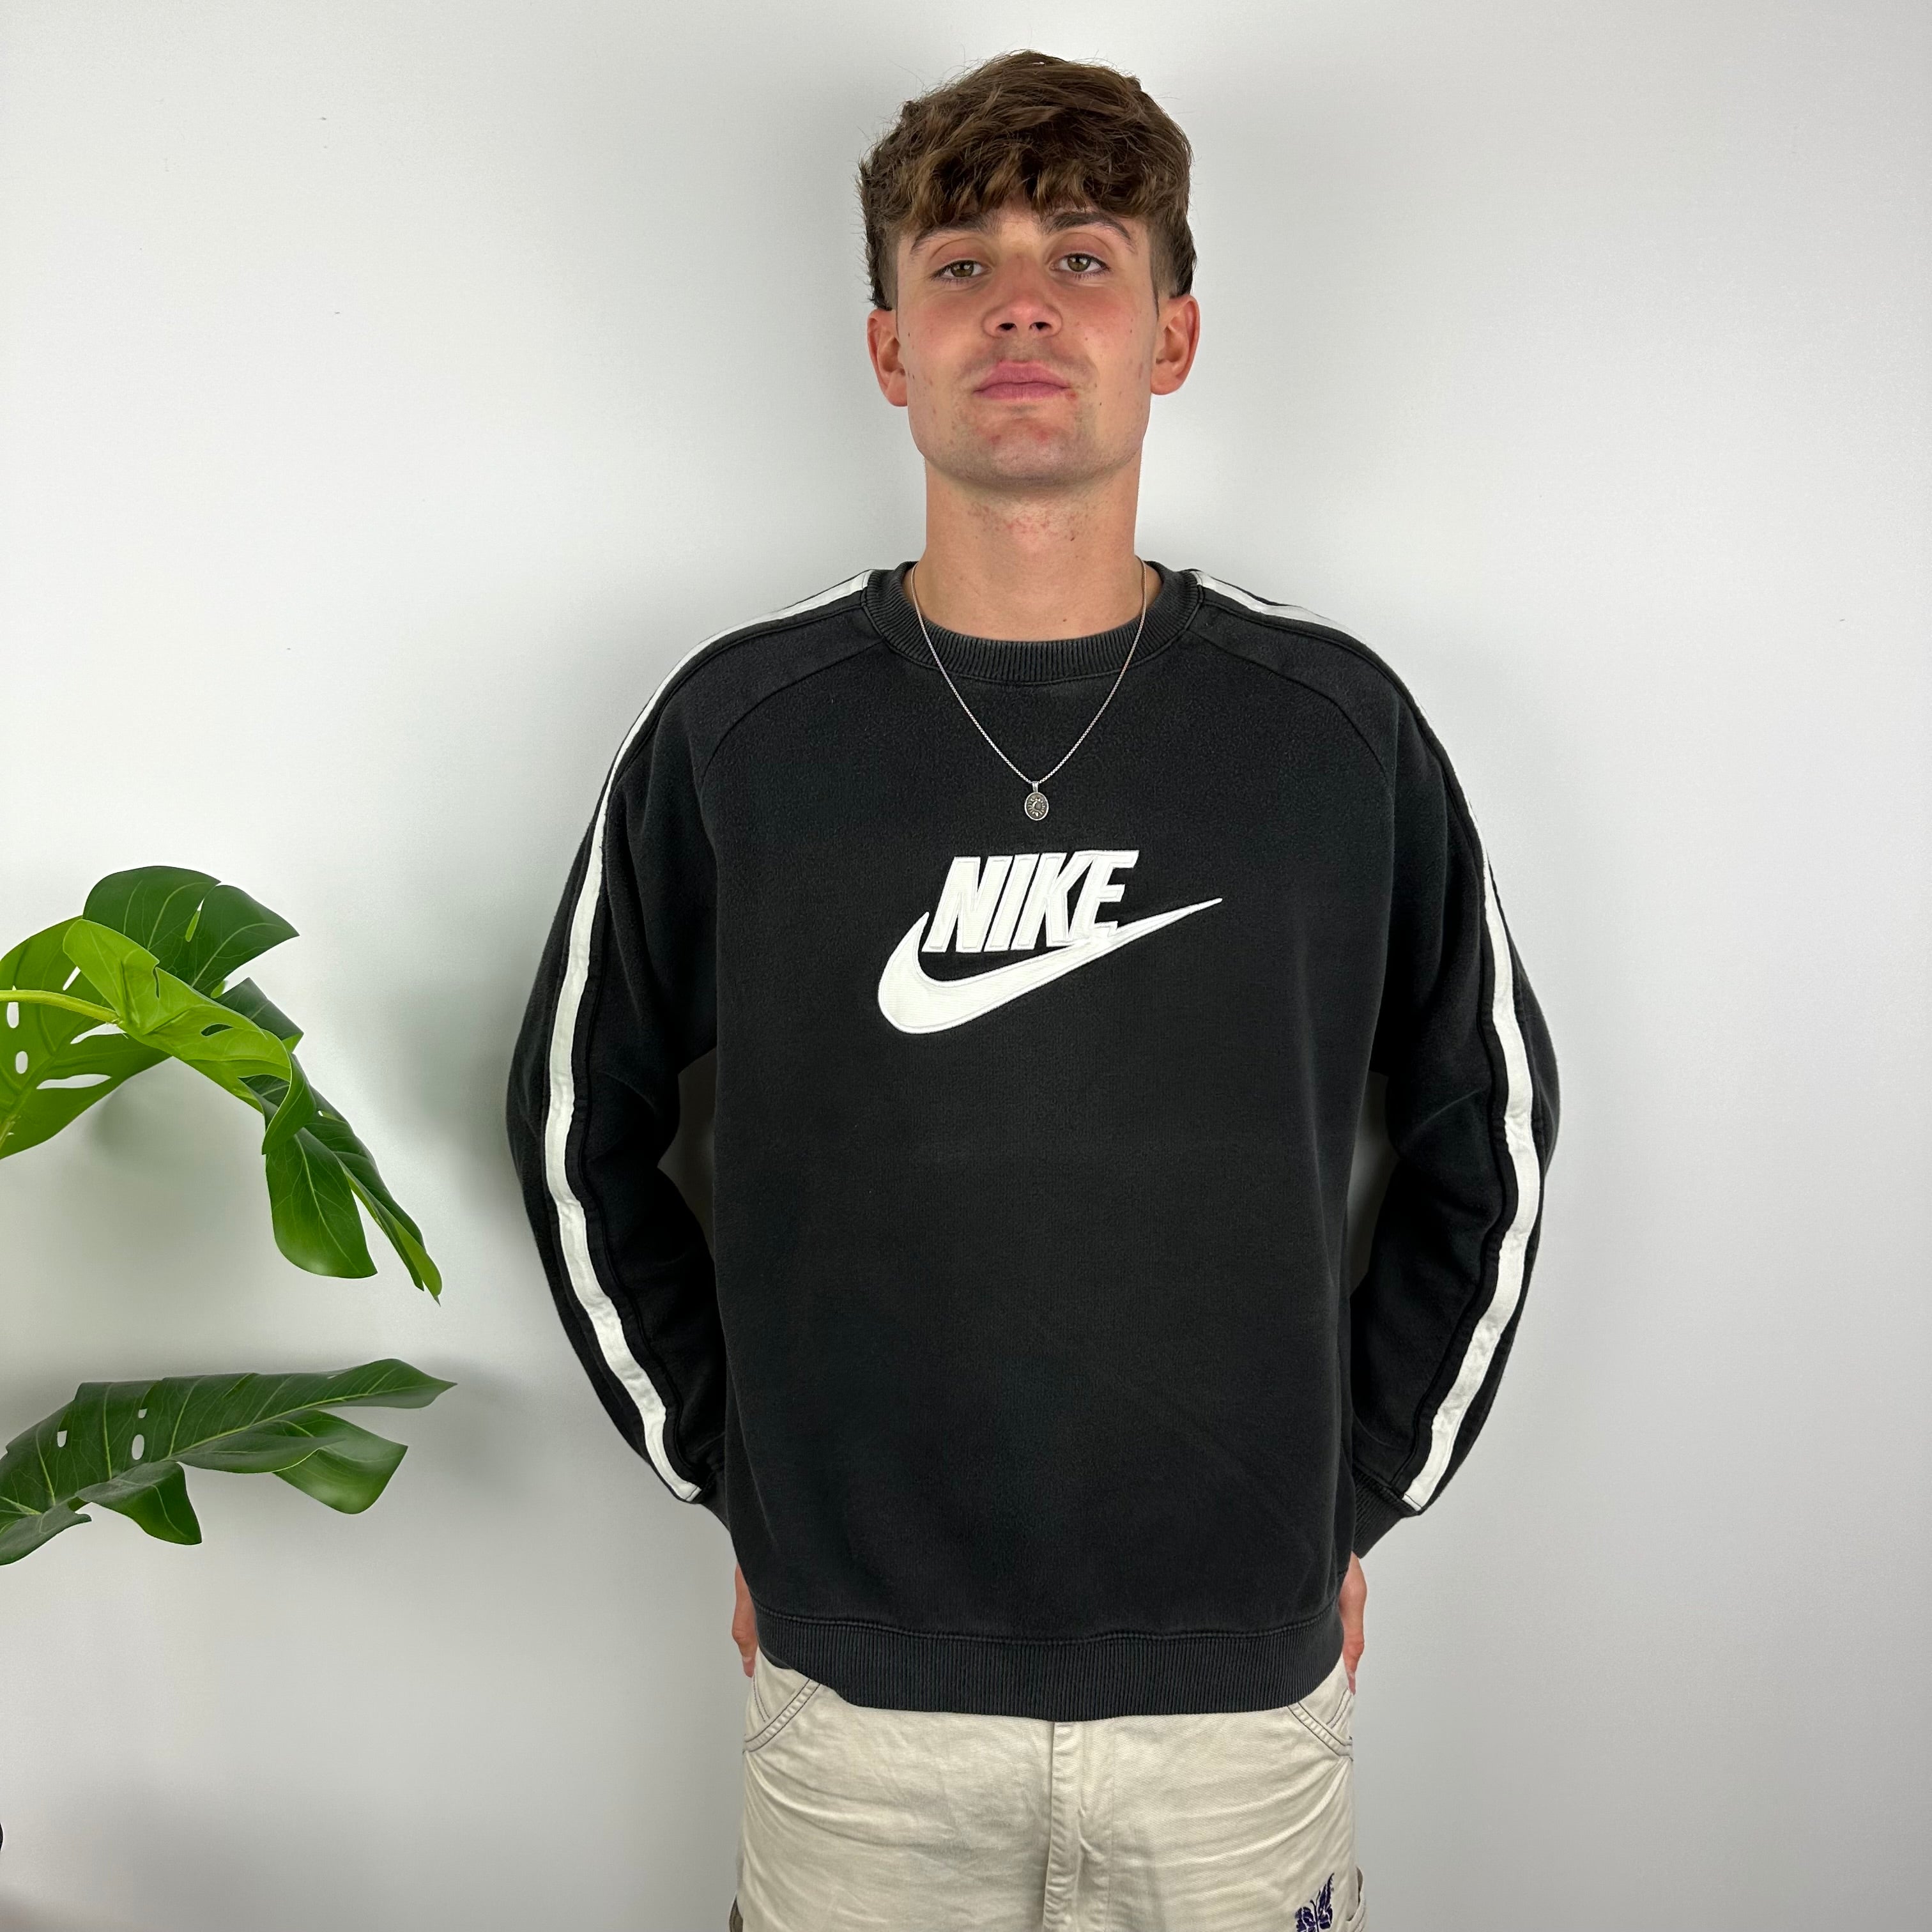 Nike RARE Black Embroidered Spell Out Sweatshirt (L)